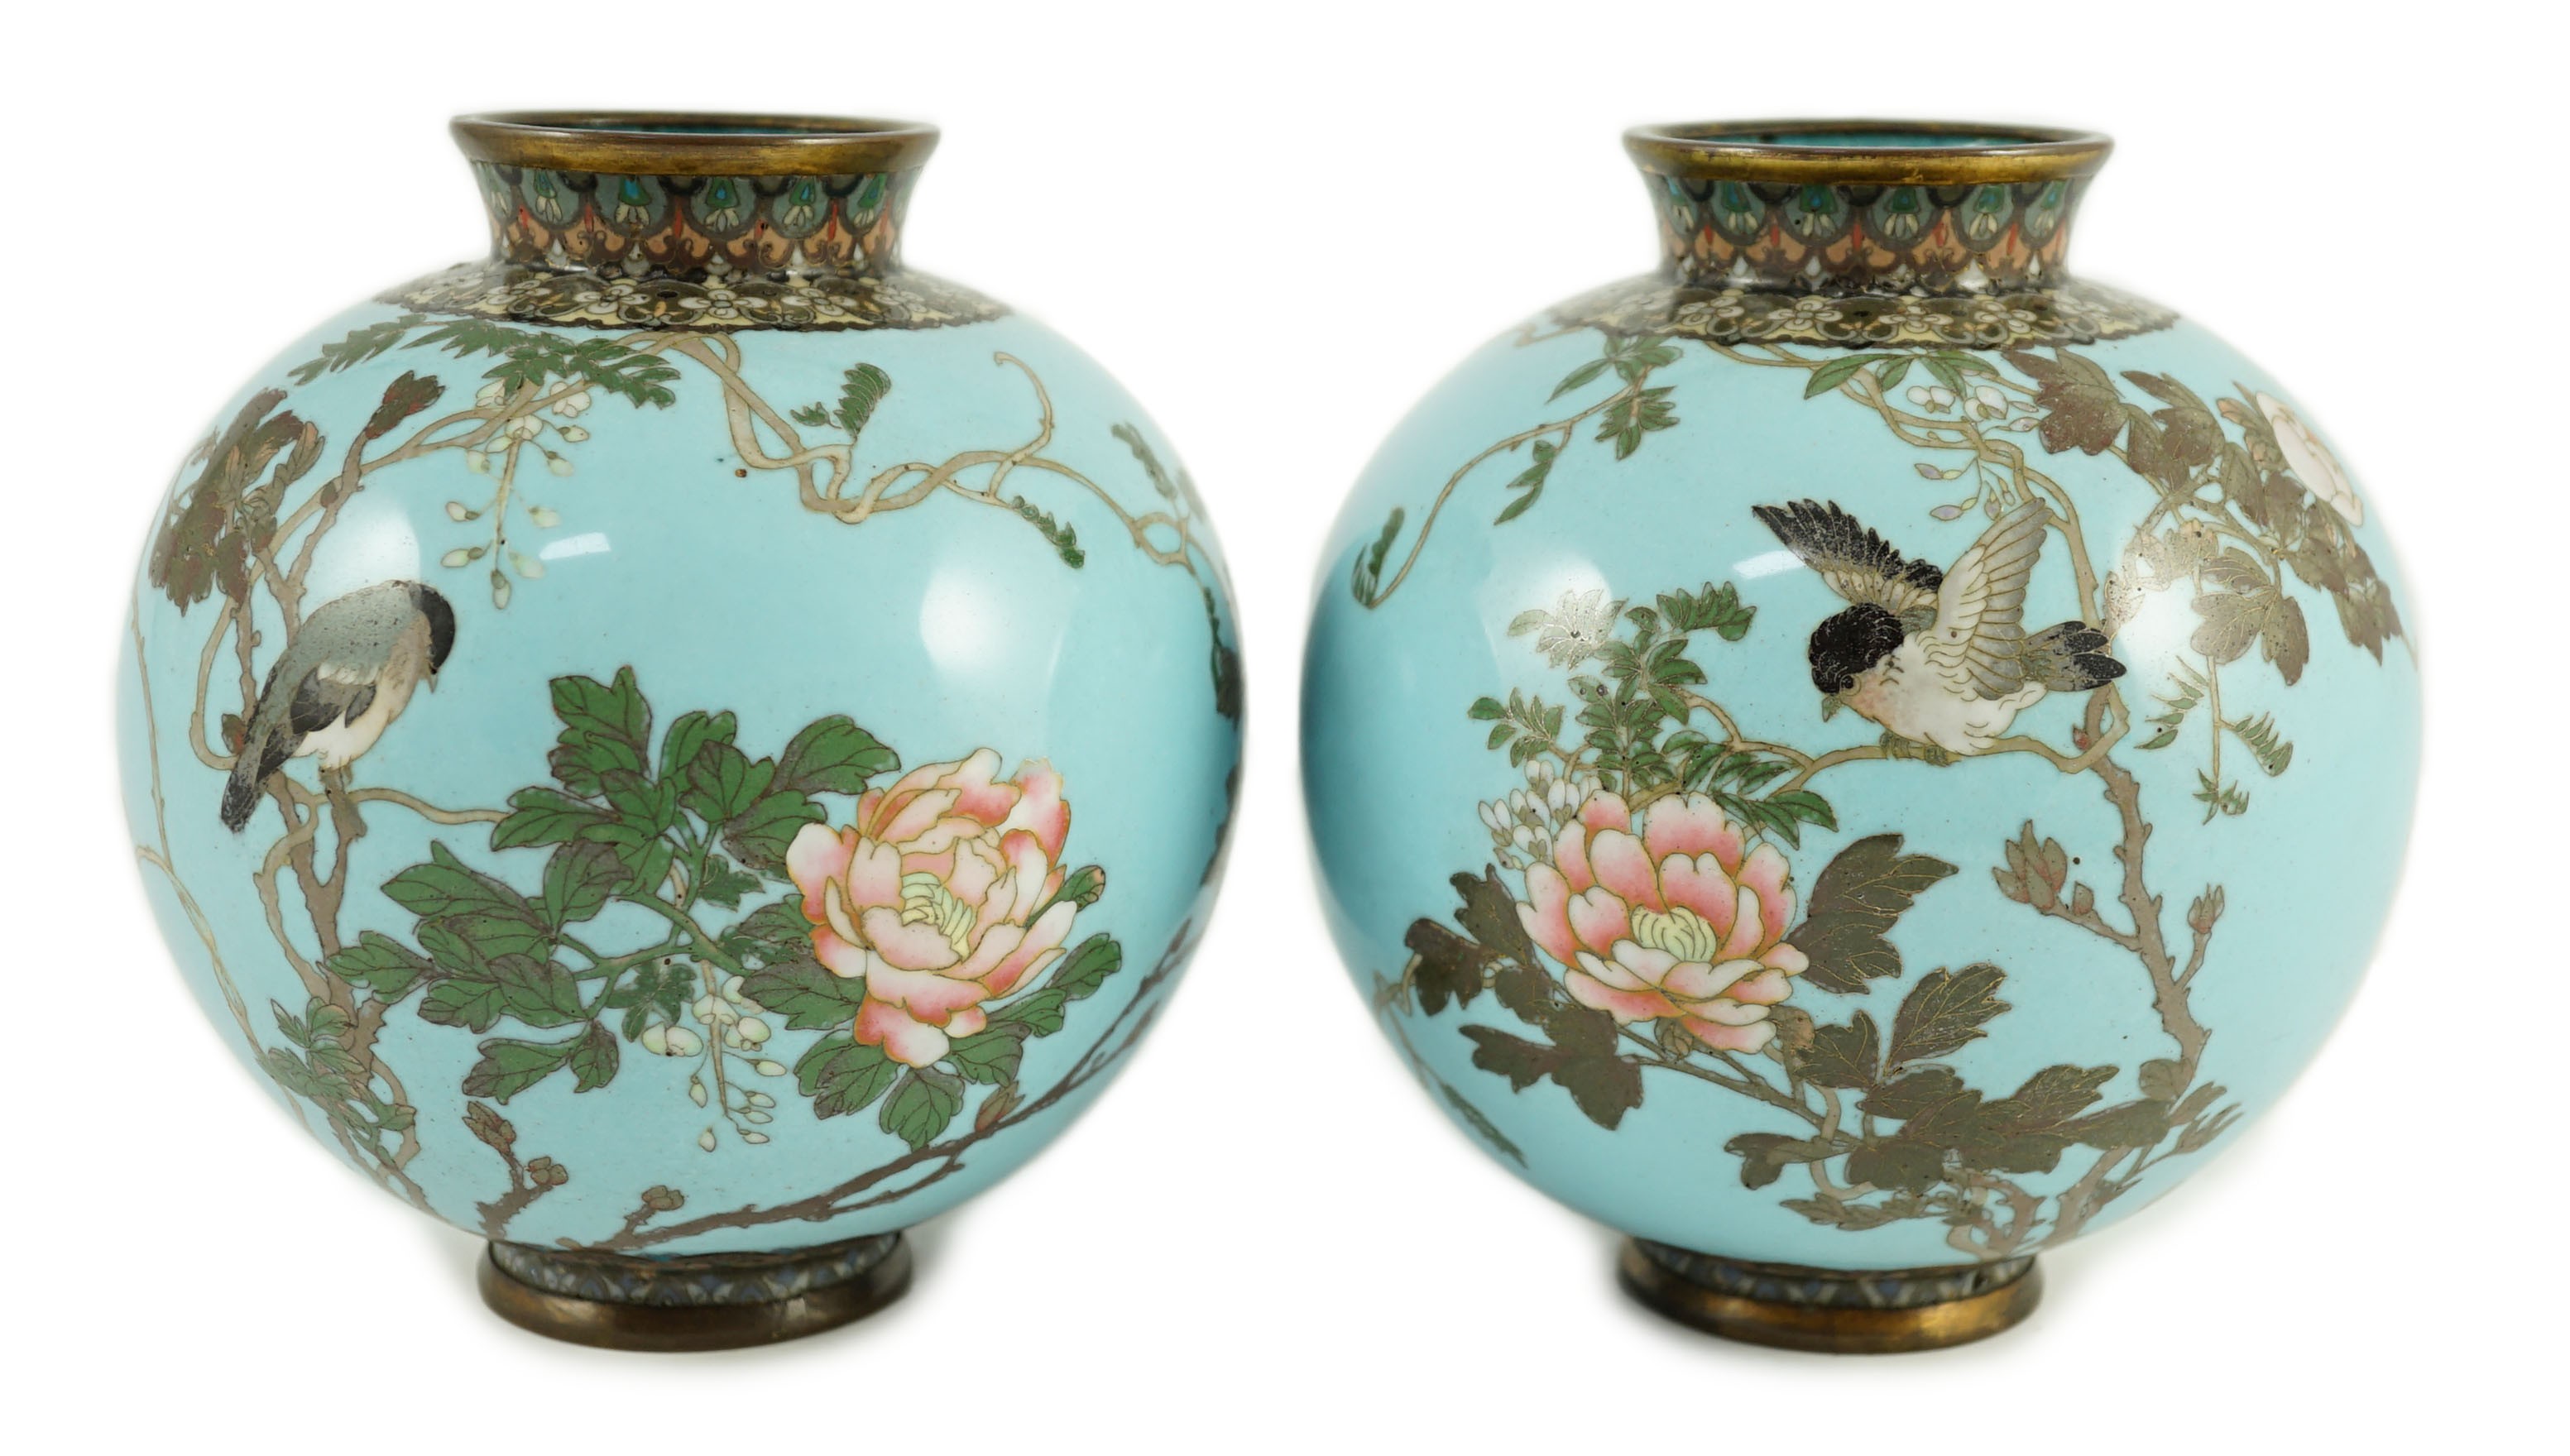 A pair of Japanese silver and copper wire cloisonné enamel vases, Meiji period, 14cm high